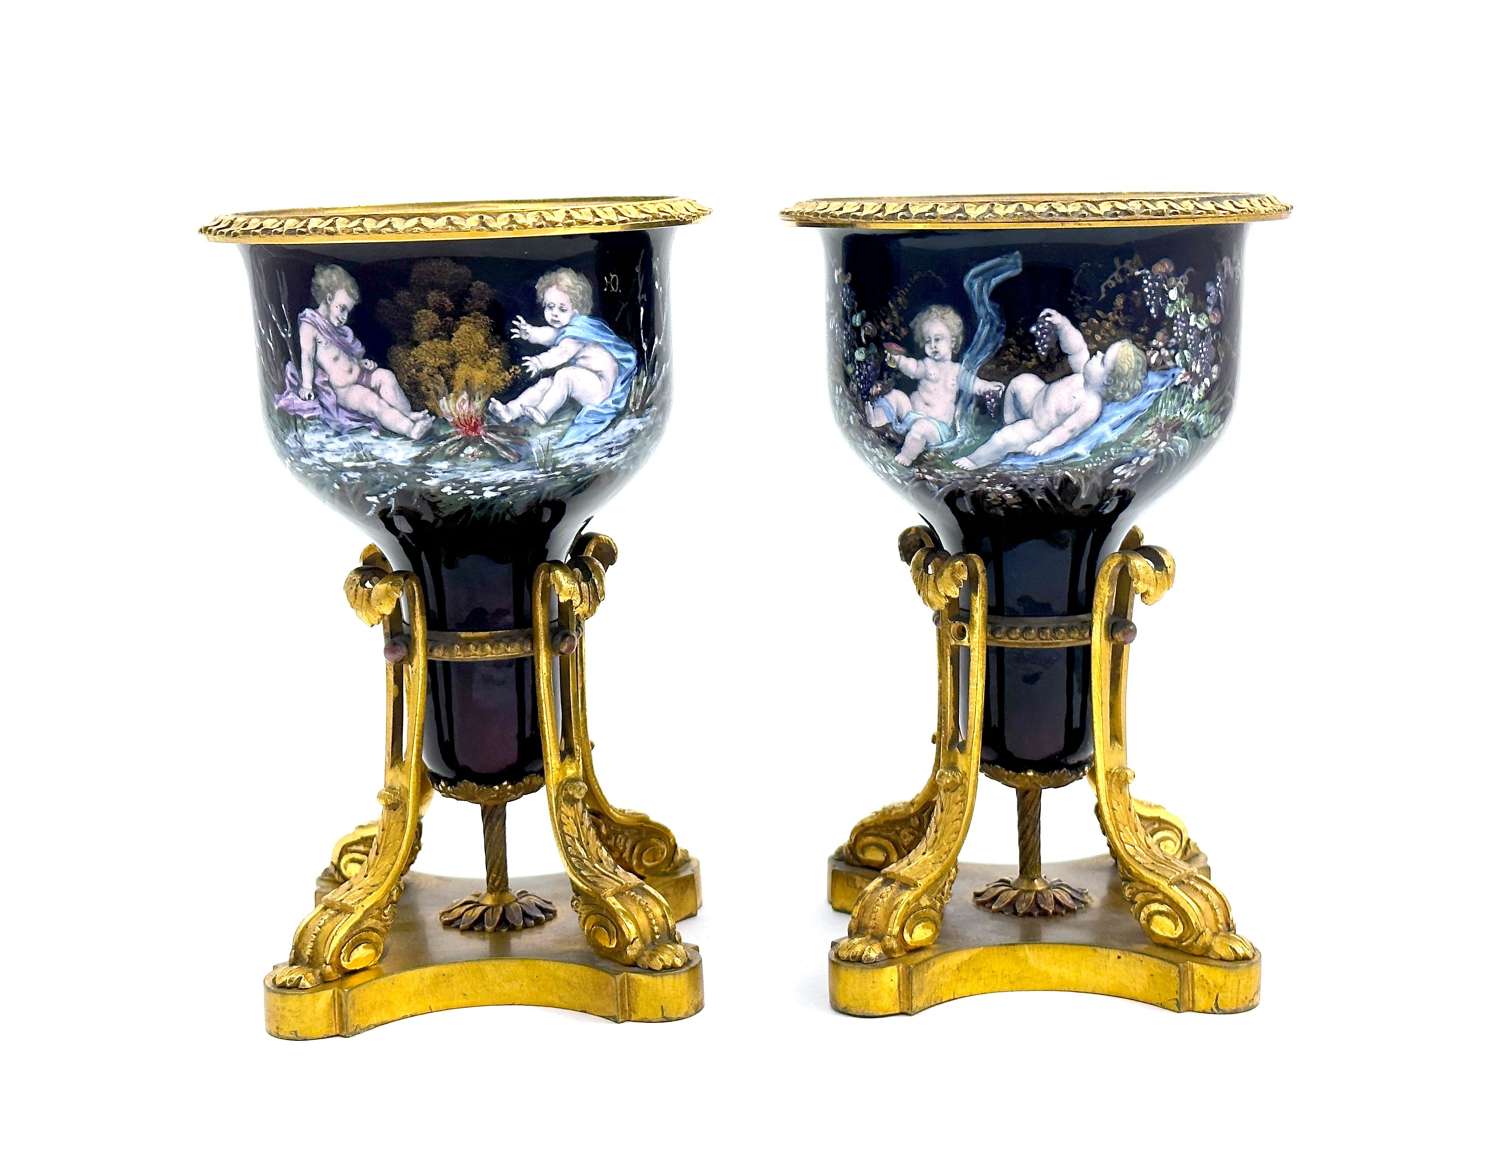 A Pair of High Quality Antique Limoges Enamel Vases with Cherubs